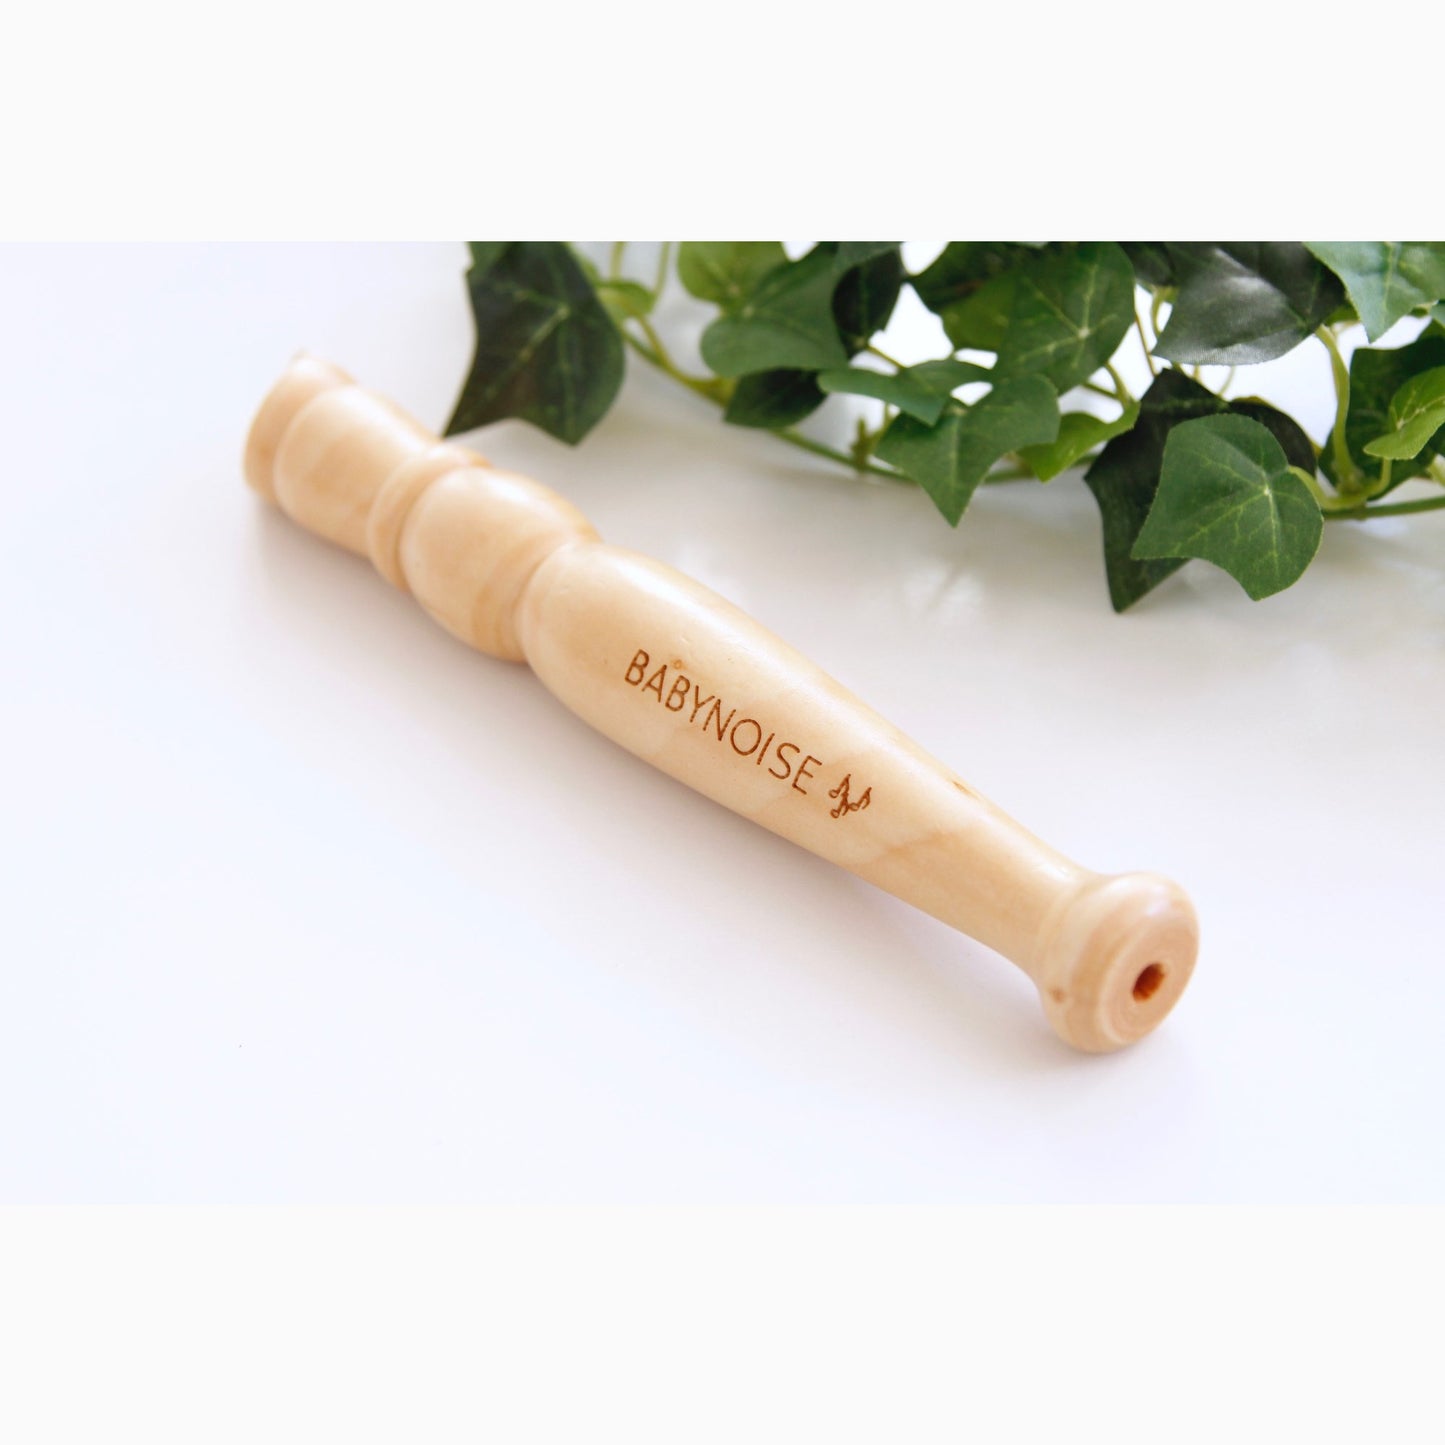 Beech Wood Babynoise Instrument for Kids